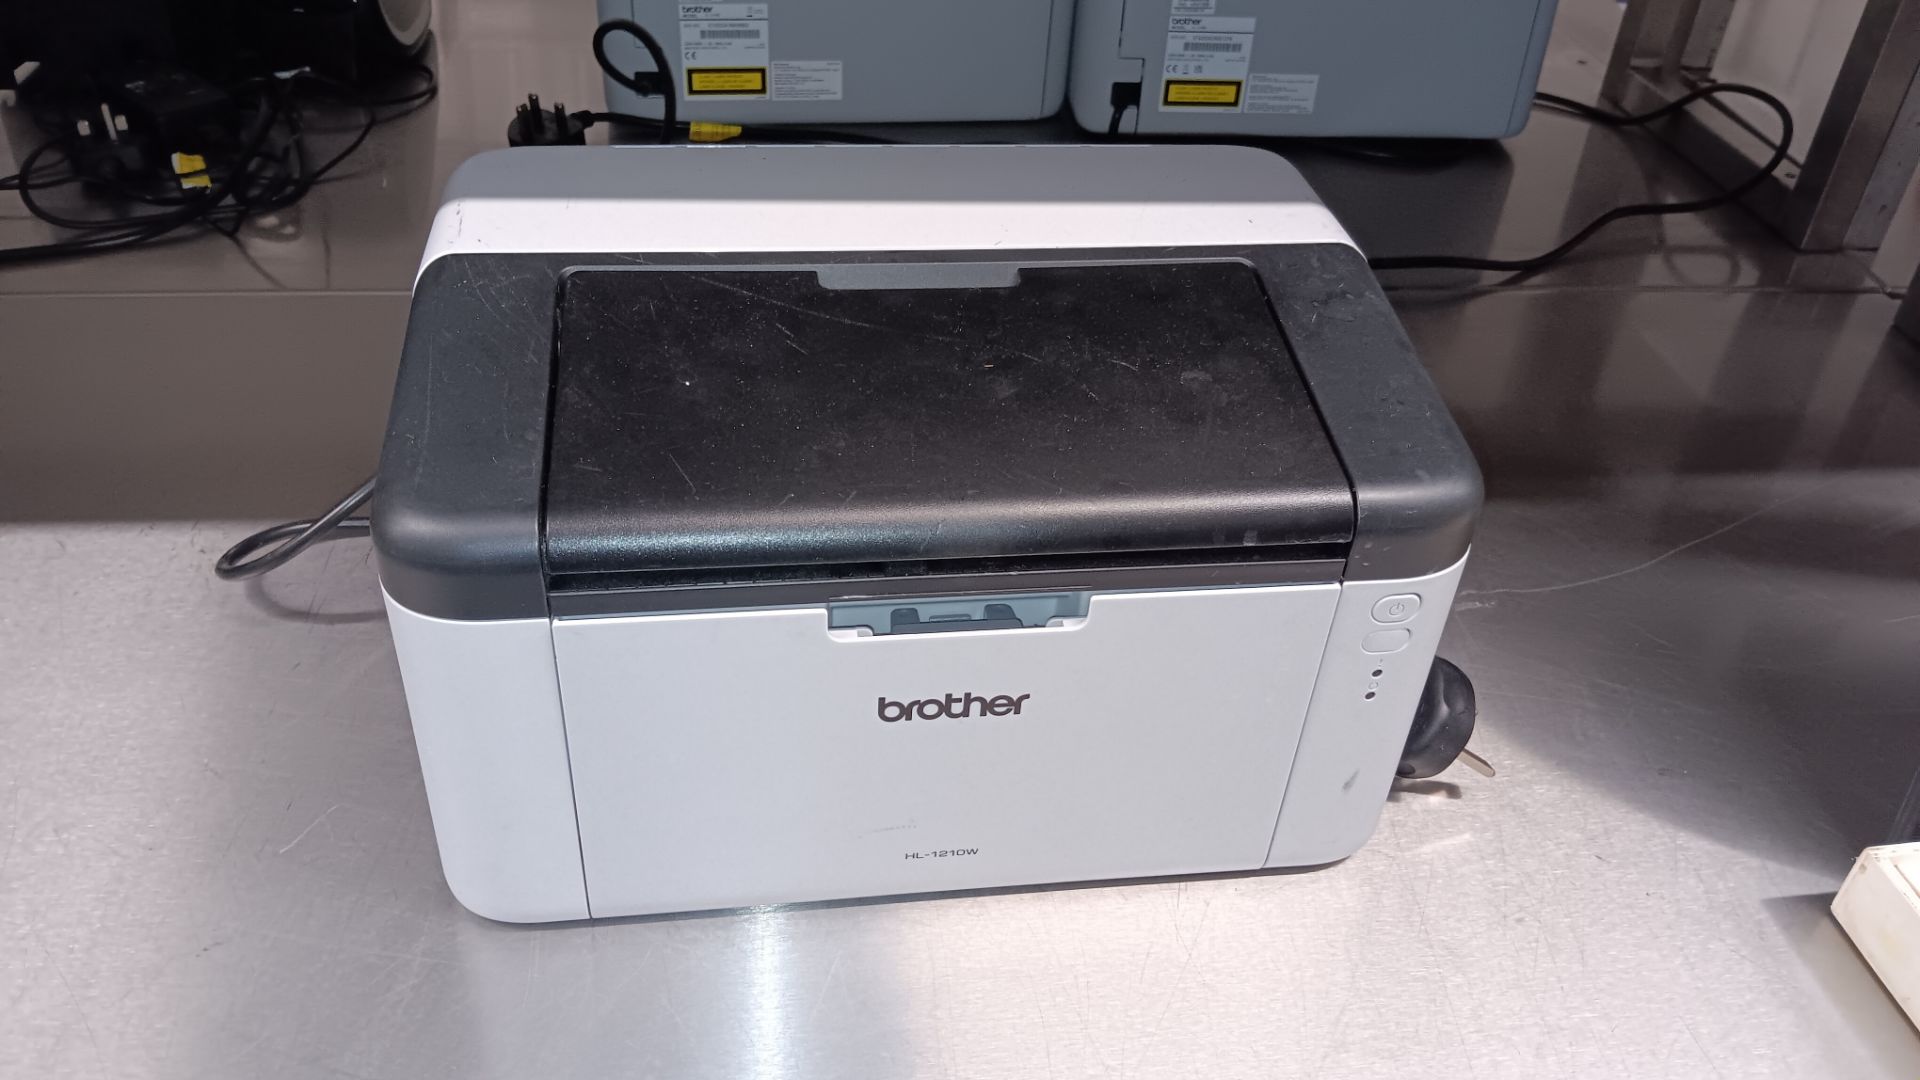 Brother HL-1210W Wireless mono laser printer, serial number E74222K2N501031